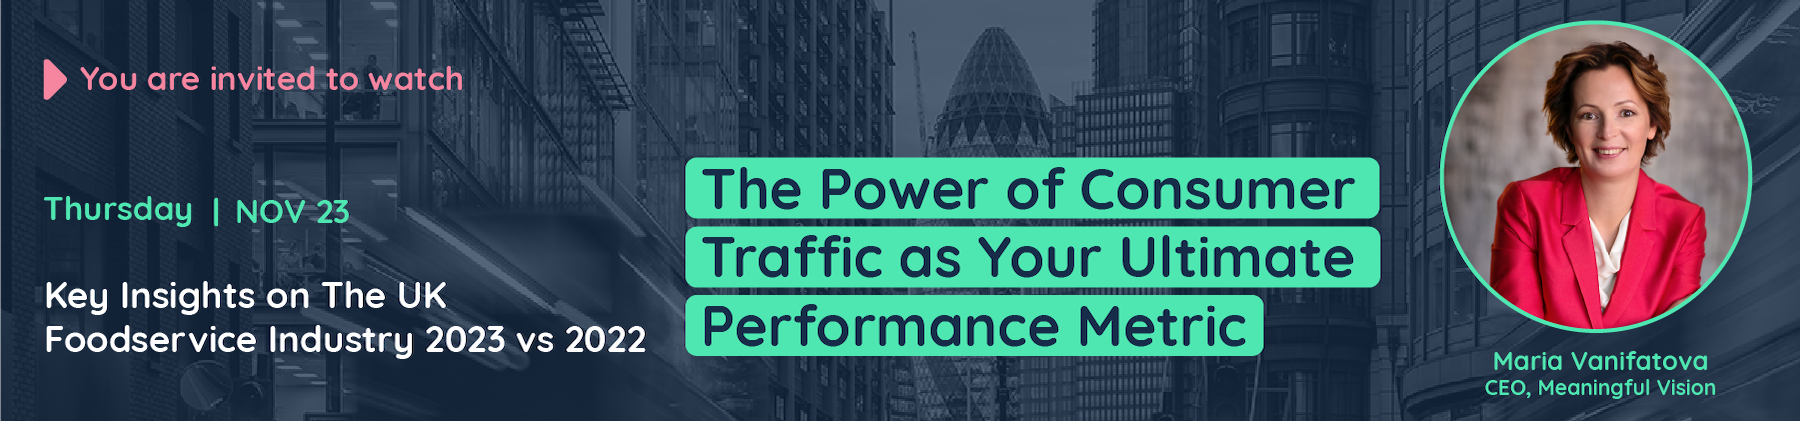 The Power of Consumer Traffic as Your ultimate Performance Metric